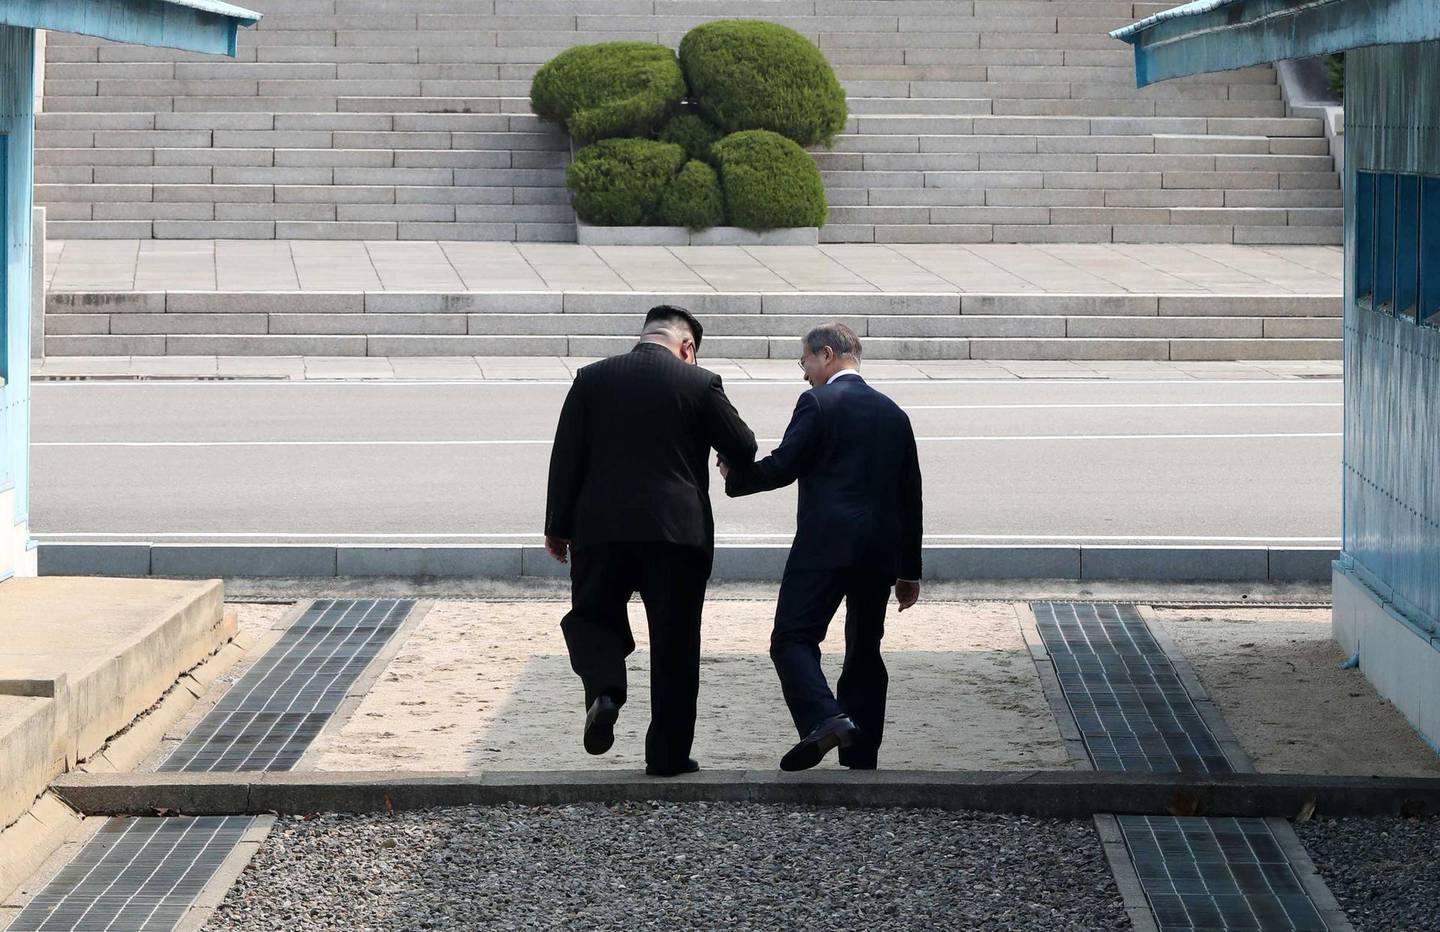 epaselect epa06695554 South Korean President Moon Jae-in (R) and North Korean leader Kim Jong-un (L) hold hands as they cross the military demarcation line (MDL) at the Joint Security Area (JSA) on the Demilitarized Zone (DMZ) in the border village of Panmunjom in Paju, South Korea, 27 April 2018. South Korean President Moon Jae-in and North Korean leader Kim Jong-un are meeting at the Peace House in Panmunjom for an inter-Korean summit. The event marks the first time a North Korean leader has crossed the border into South Korea sine the end of hostilities during the Korean War.  EPA/KOREA SUMMIT PRESS POOL / POOL